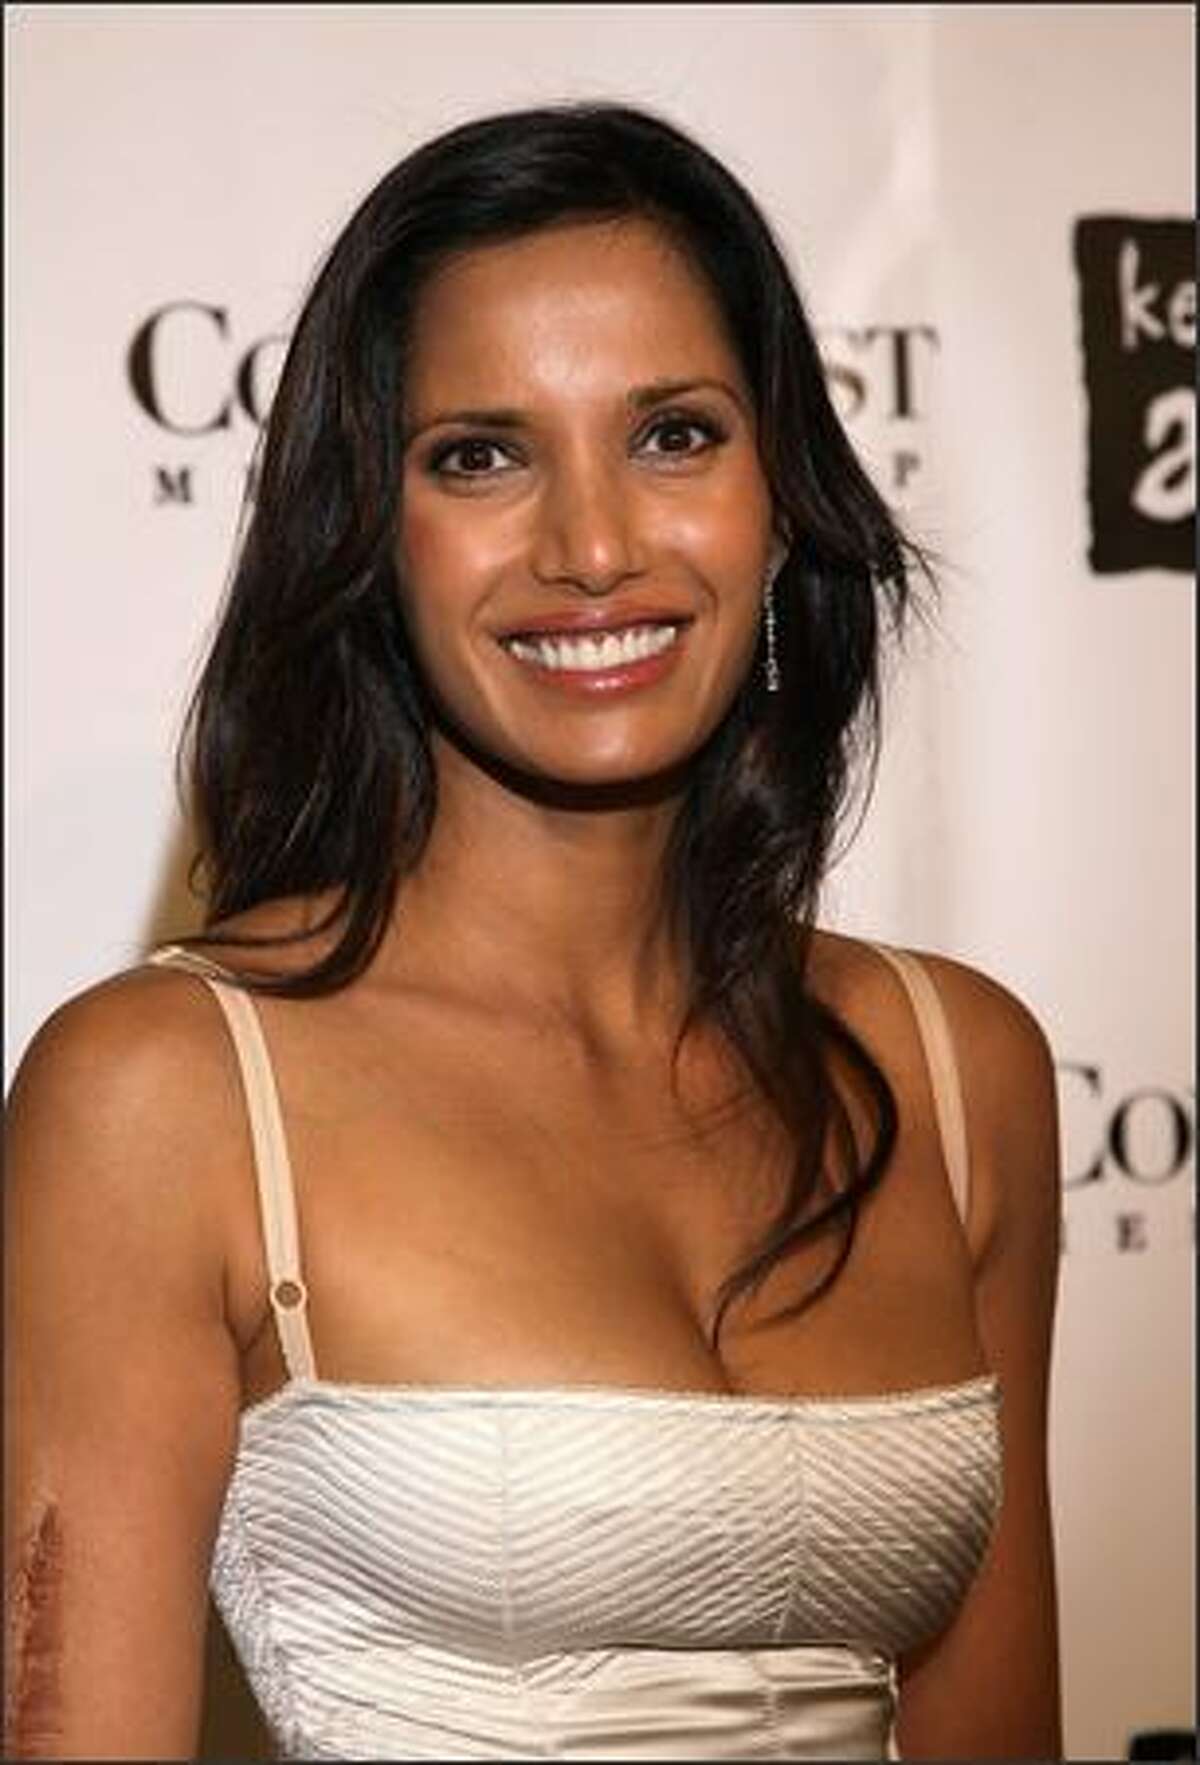 TV personality Padma Lakshmi arrives at the 4th Annual Black Ball concert for Keep a Child Alive (KCA) presented by the Conde Nast Media Group at Hammerstein Ballroom in New York City.